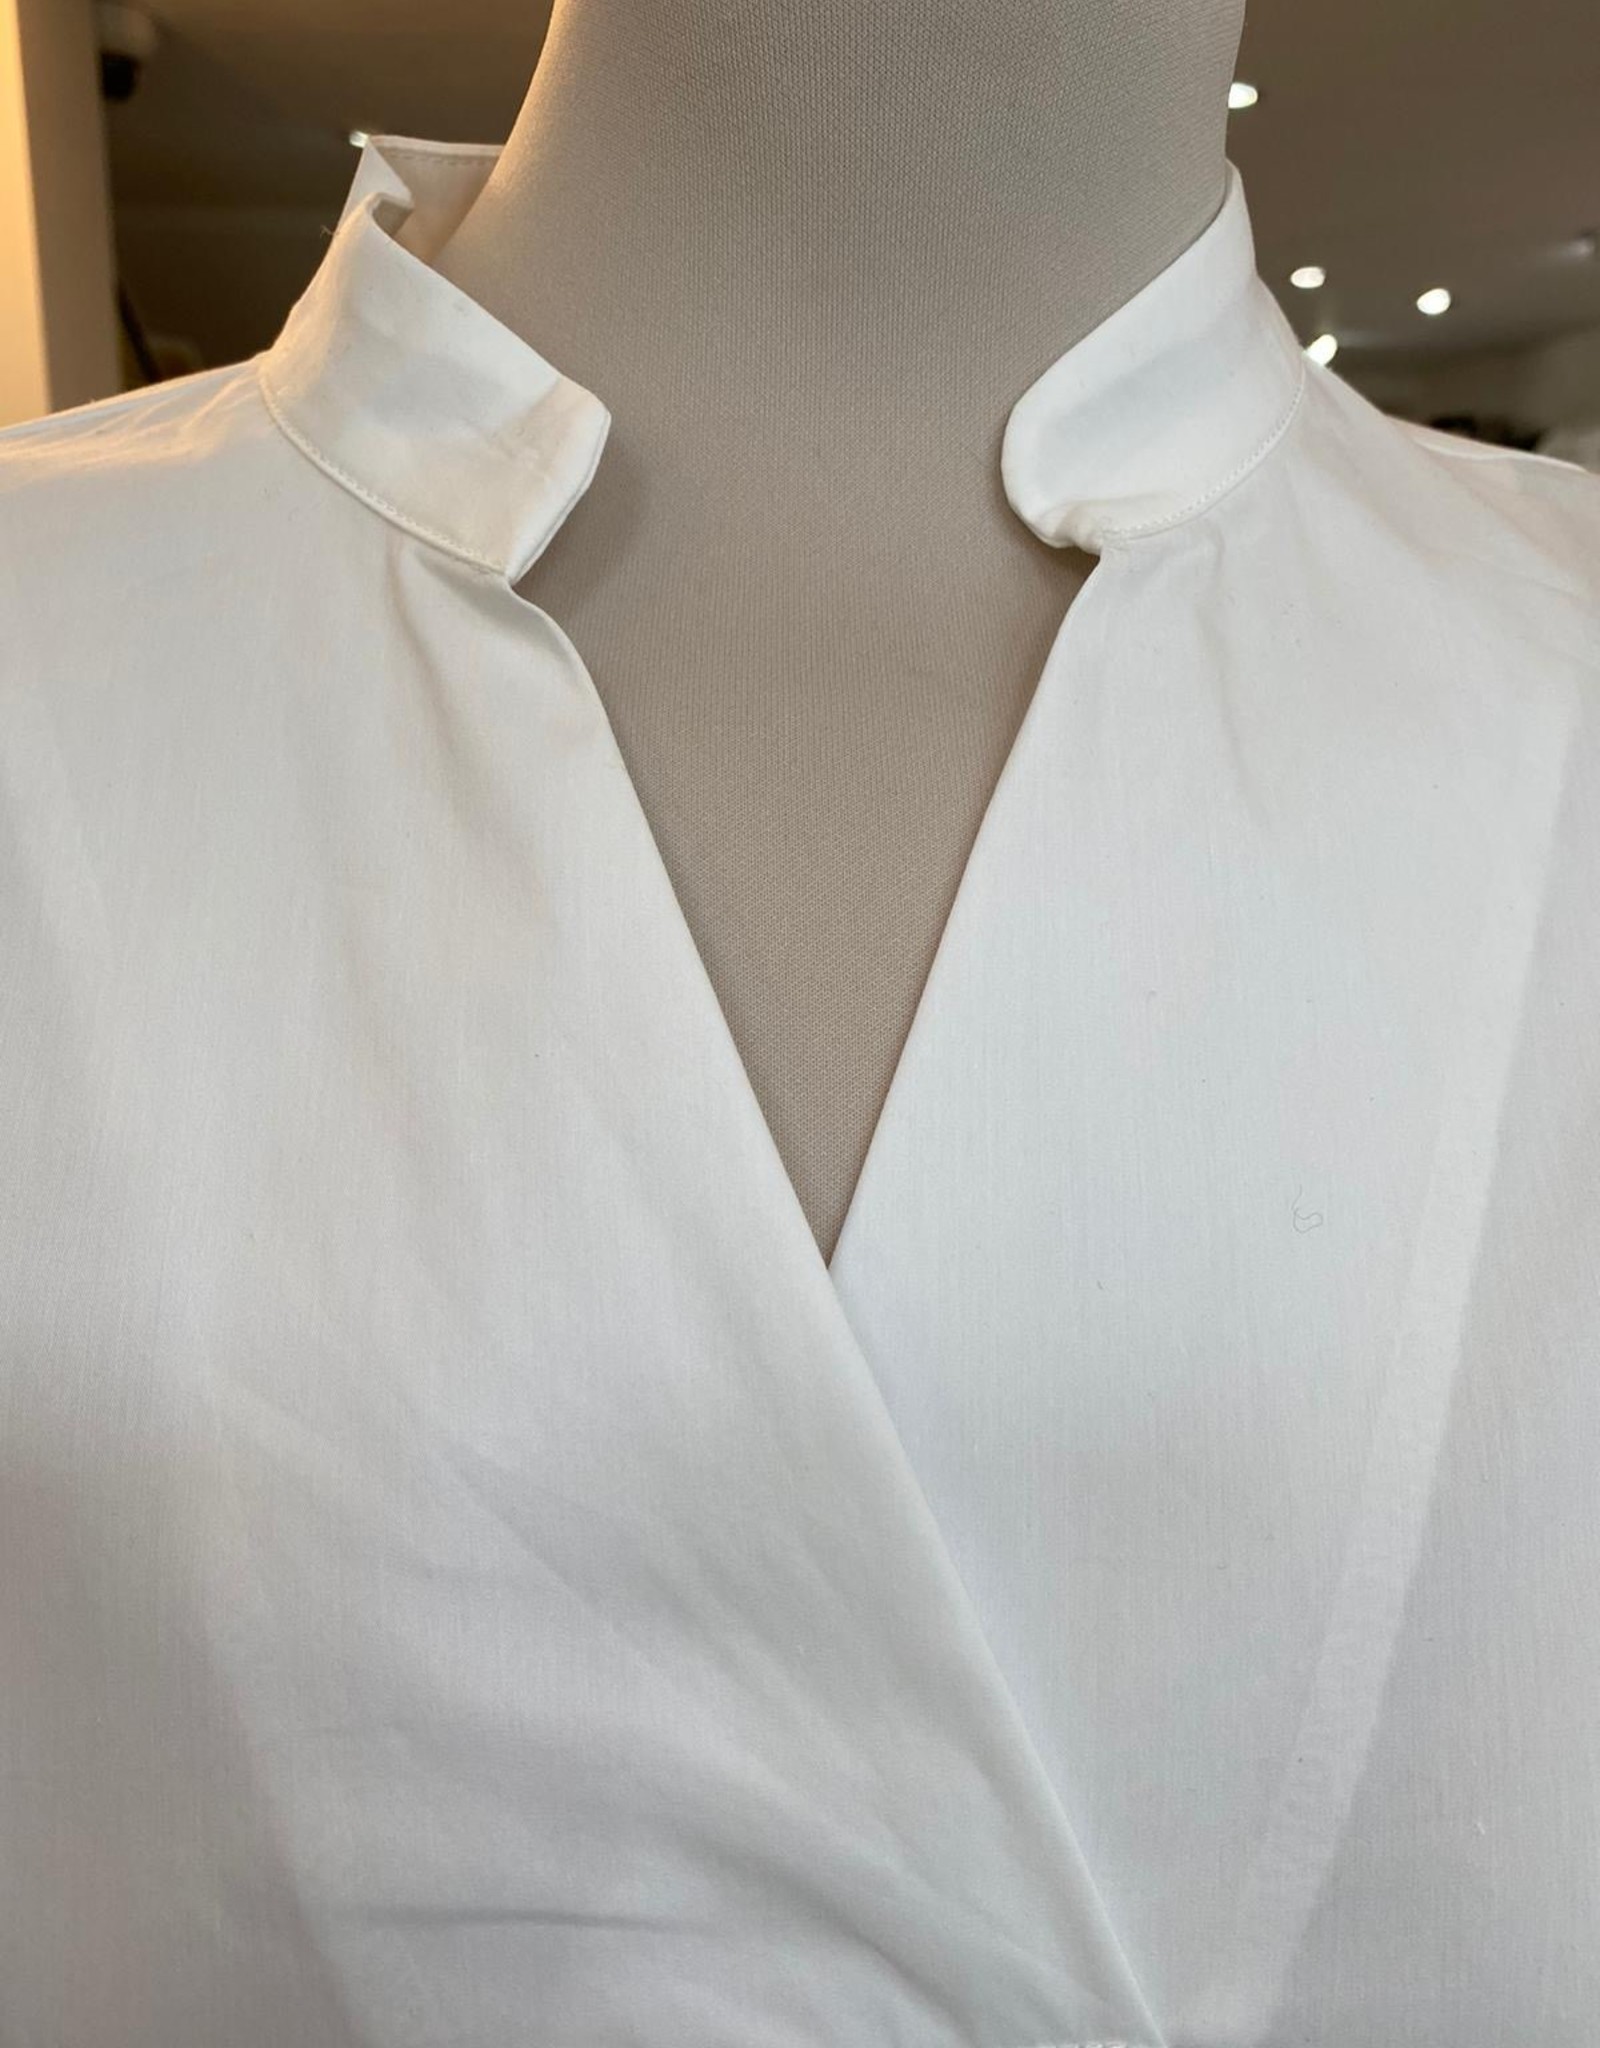 ANONYME (ITALIAN) THAIS ALBA BLOUSE / SS SHIRT  P260ST113 FROM ANONYME